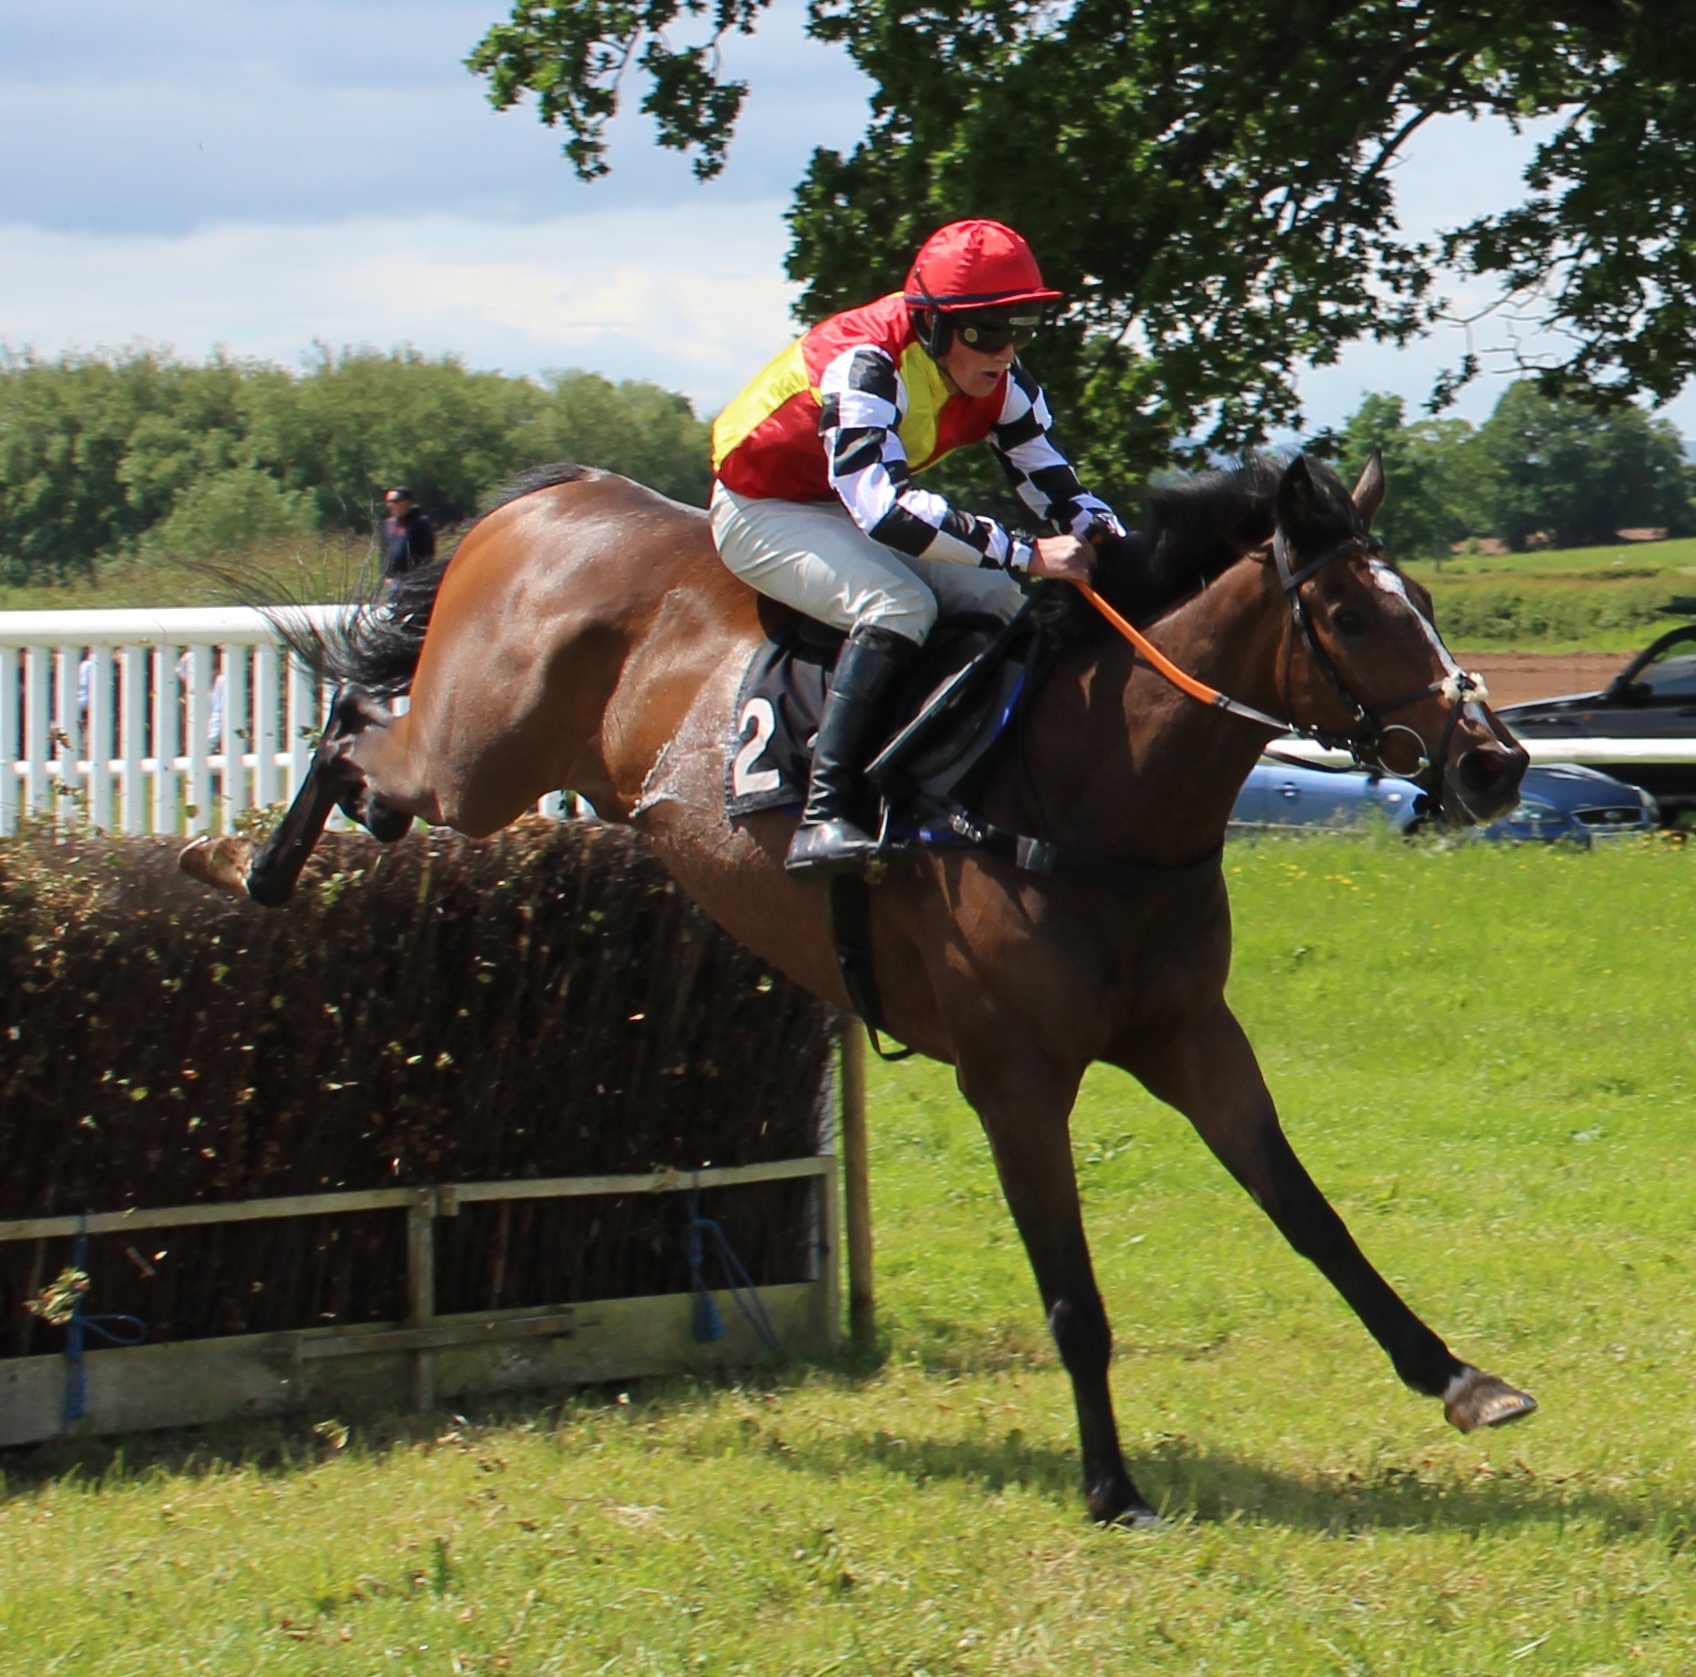 Beyond Redemption and Rupert Wilks sign off in style in the Novice Riders Final